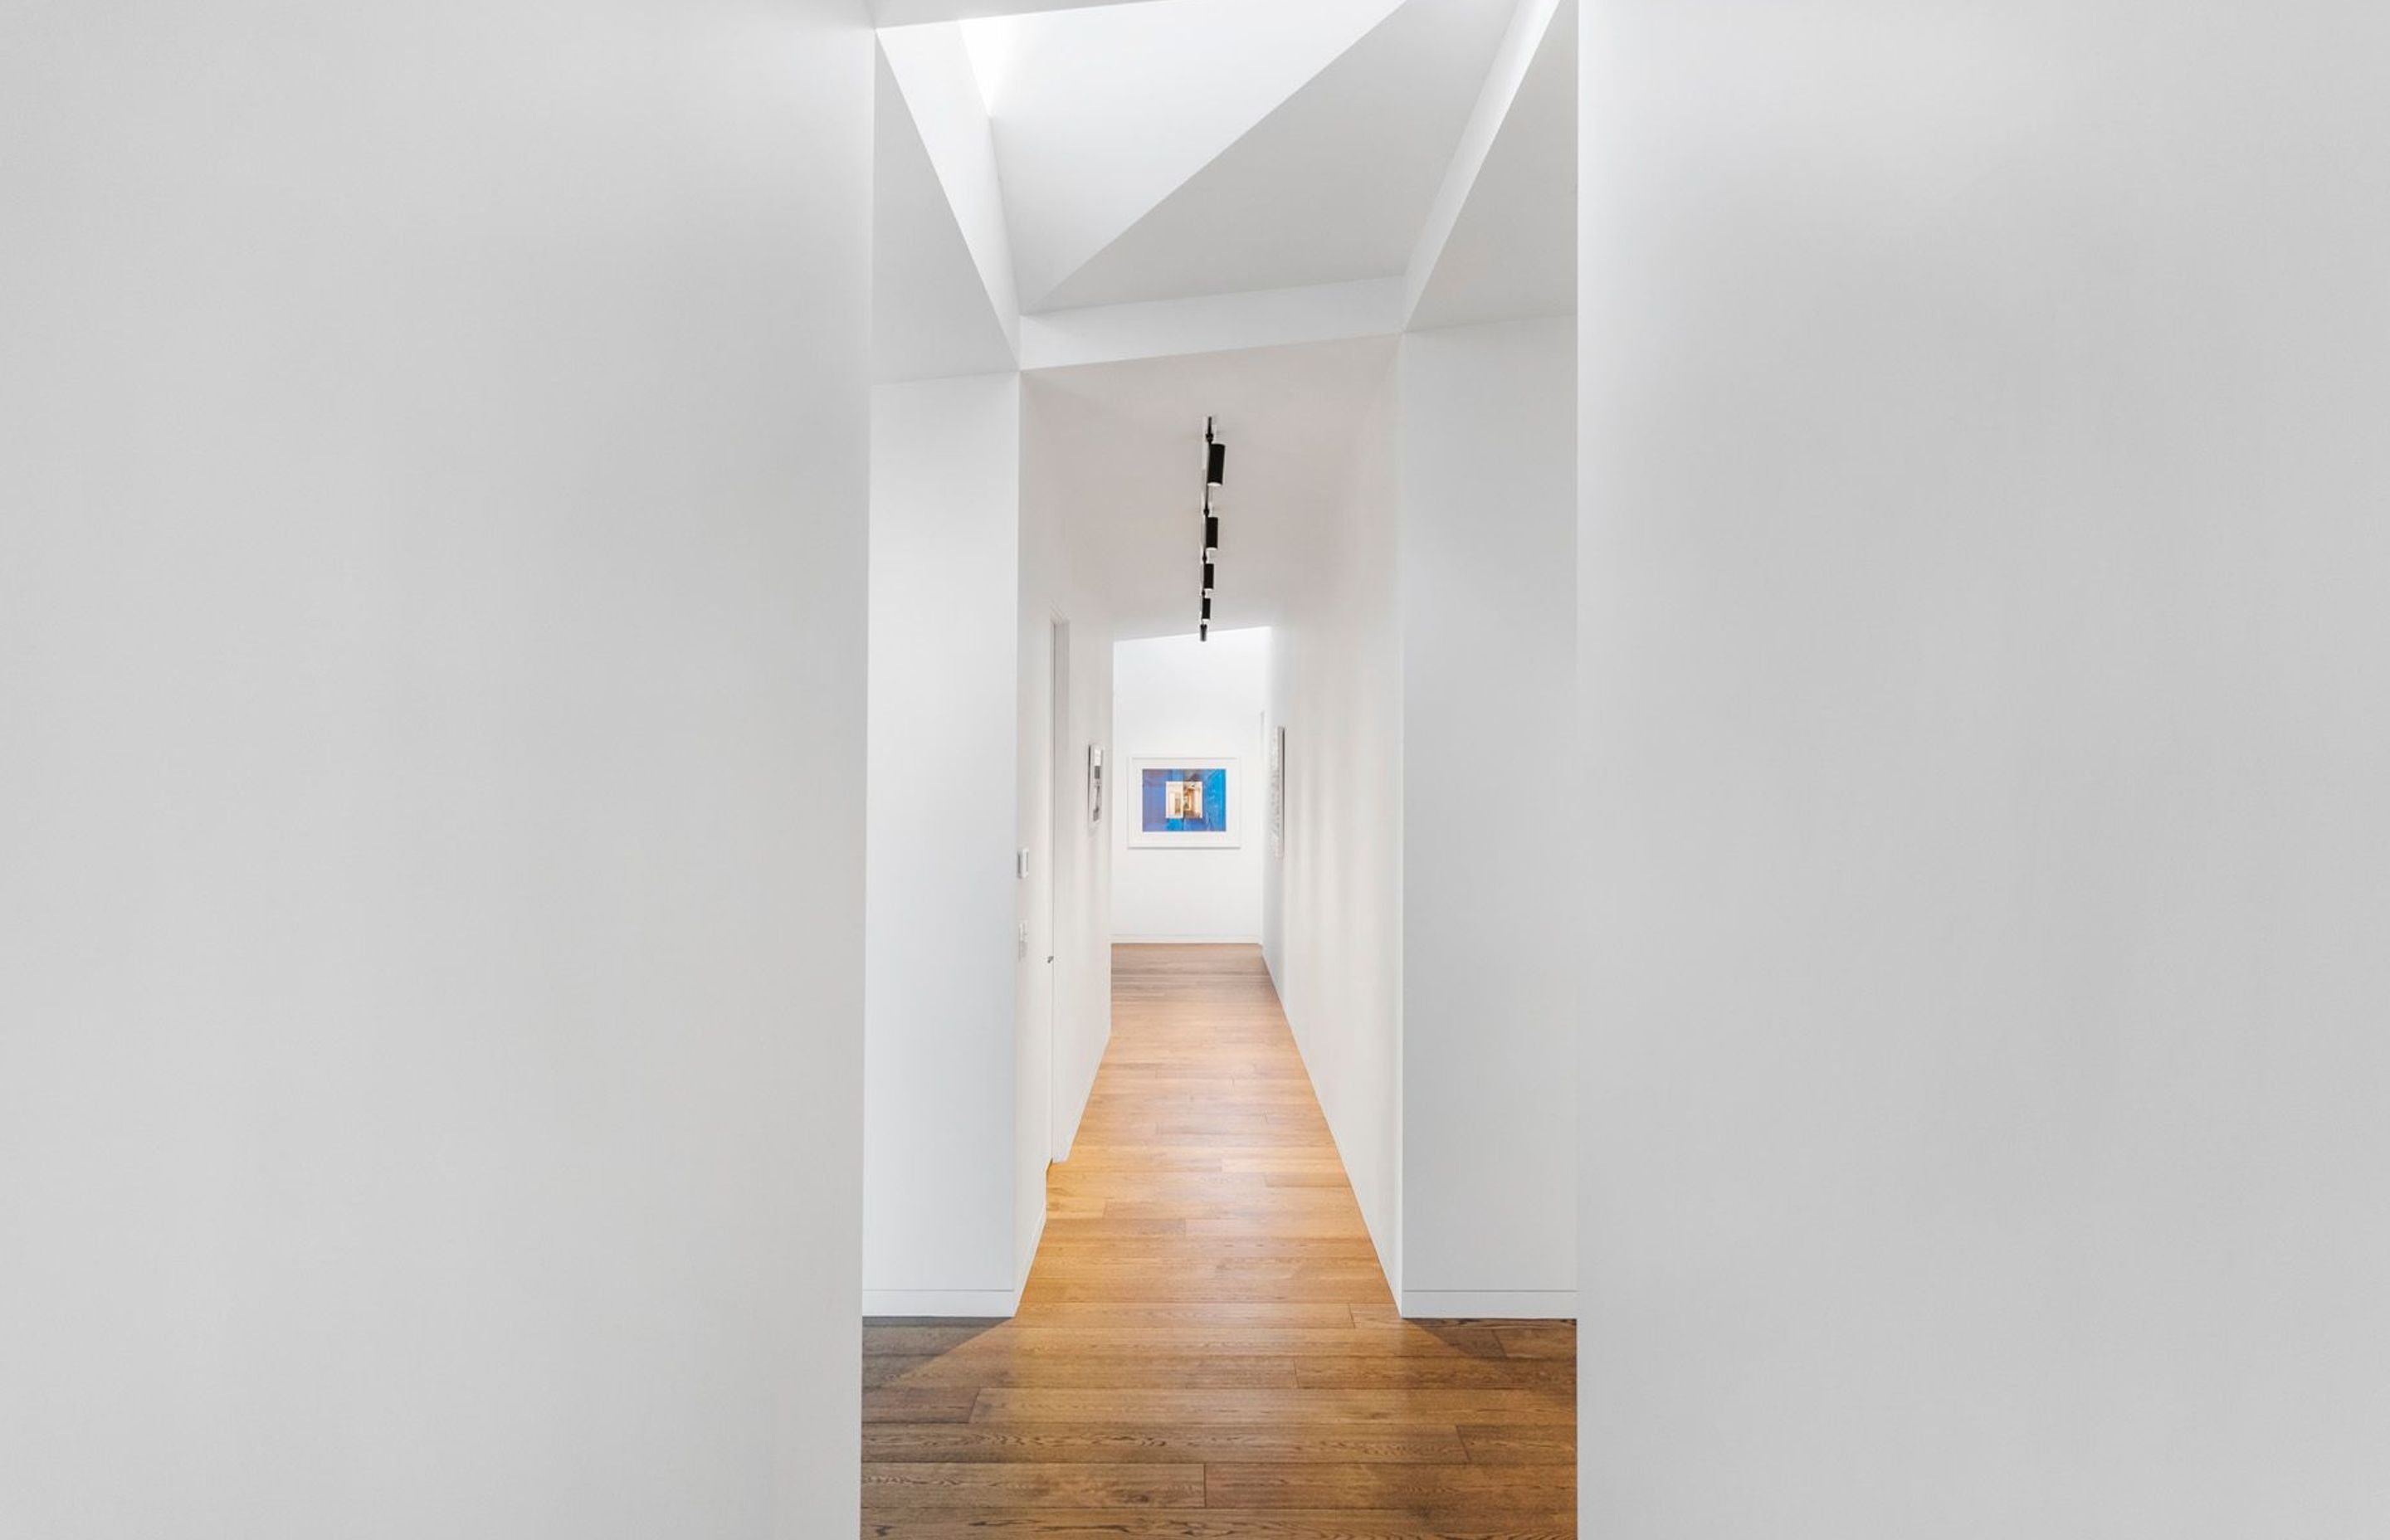 Two triangular skylights, one in the entranceway and the other at the end of the hallways, create a light-filled gallery space, perfect for showing the owner's art collection.